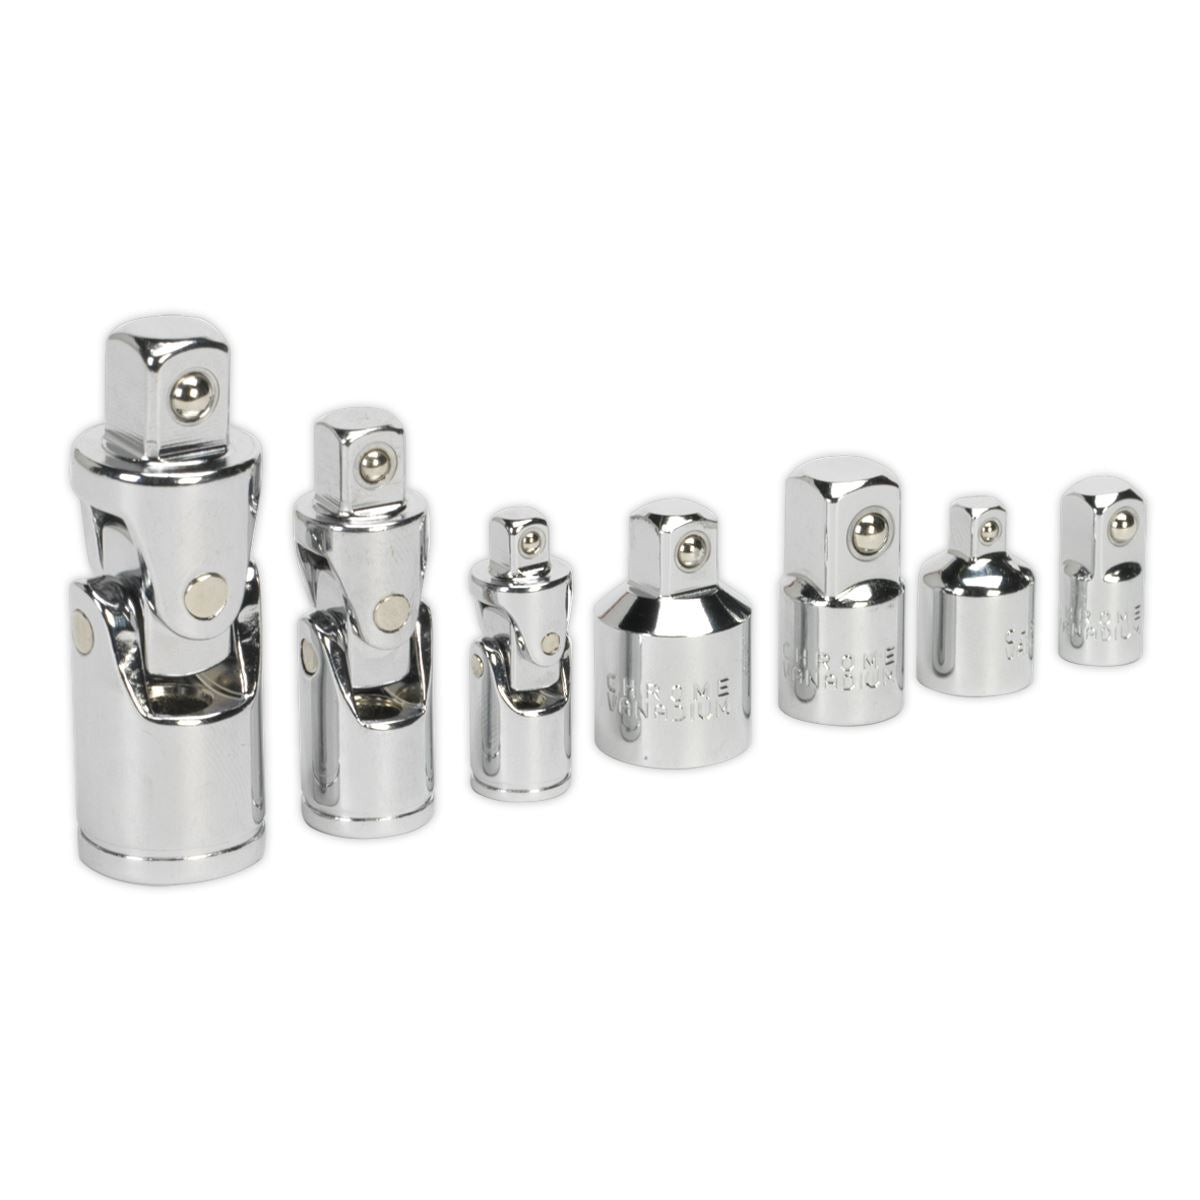 Sealey Premier 7 Piece 1/4" 3/8" 1/2" Drive Universal Joint and Socket Adaptor Set